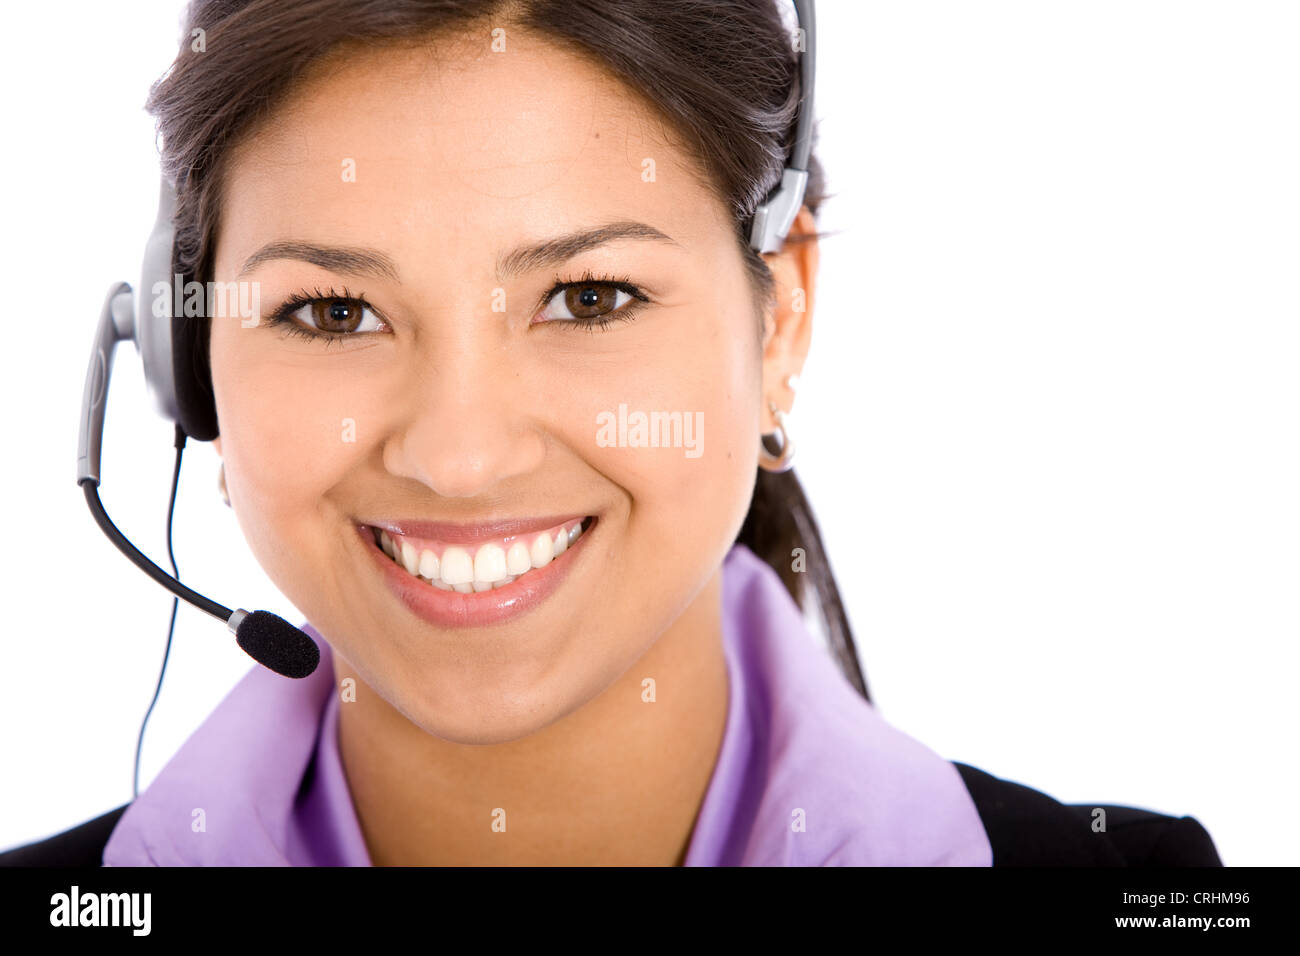 beautiful business customer support woman with headset smiling Stock Photo